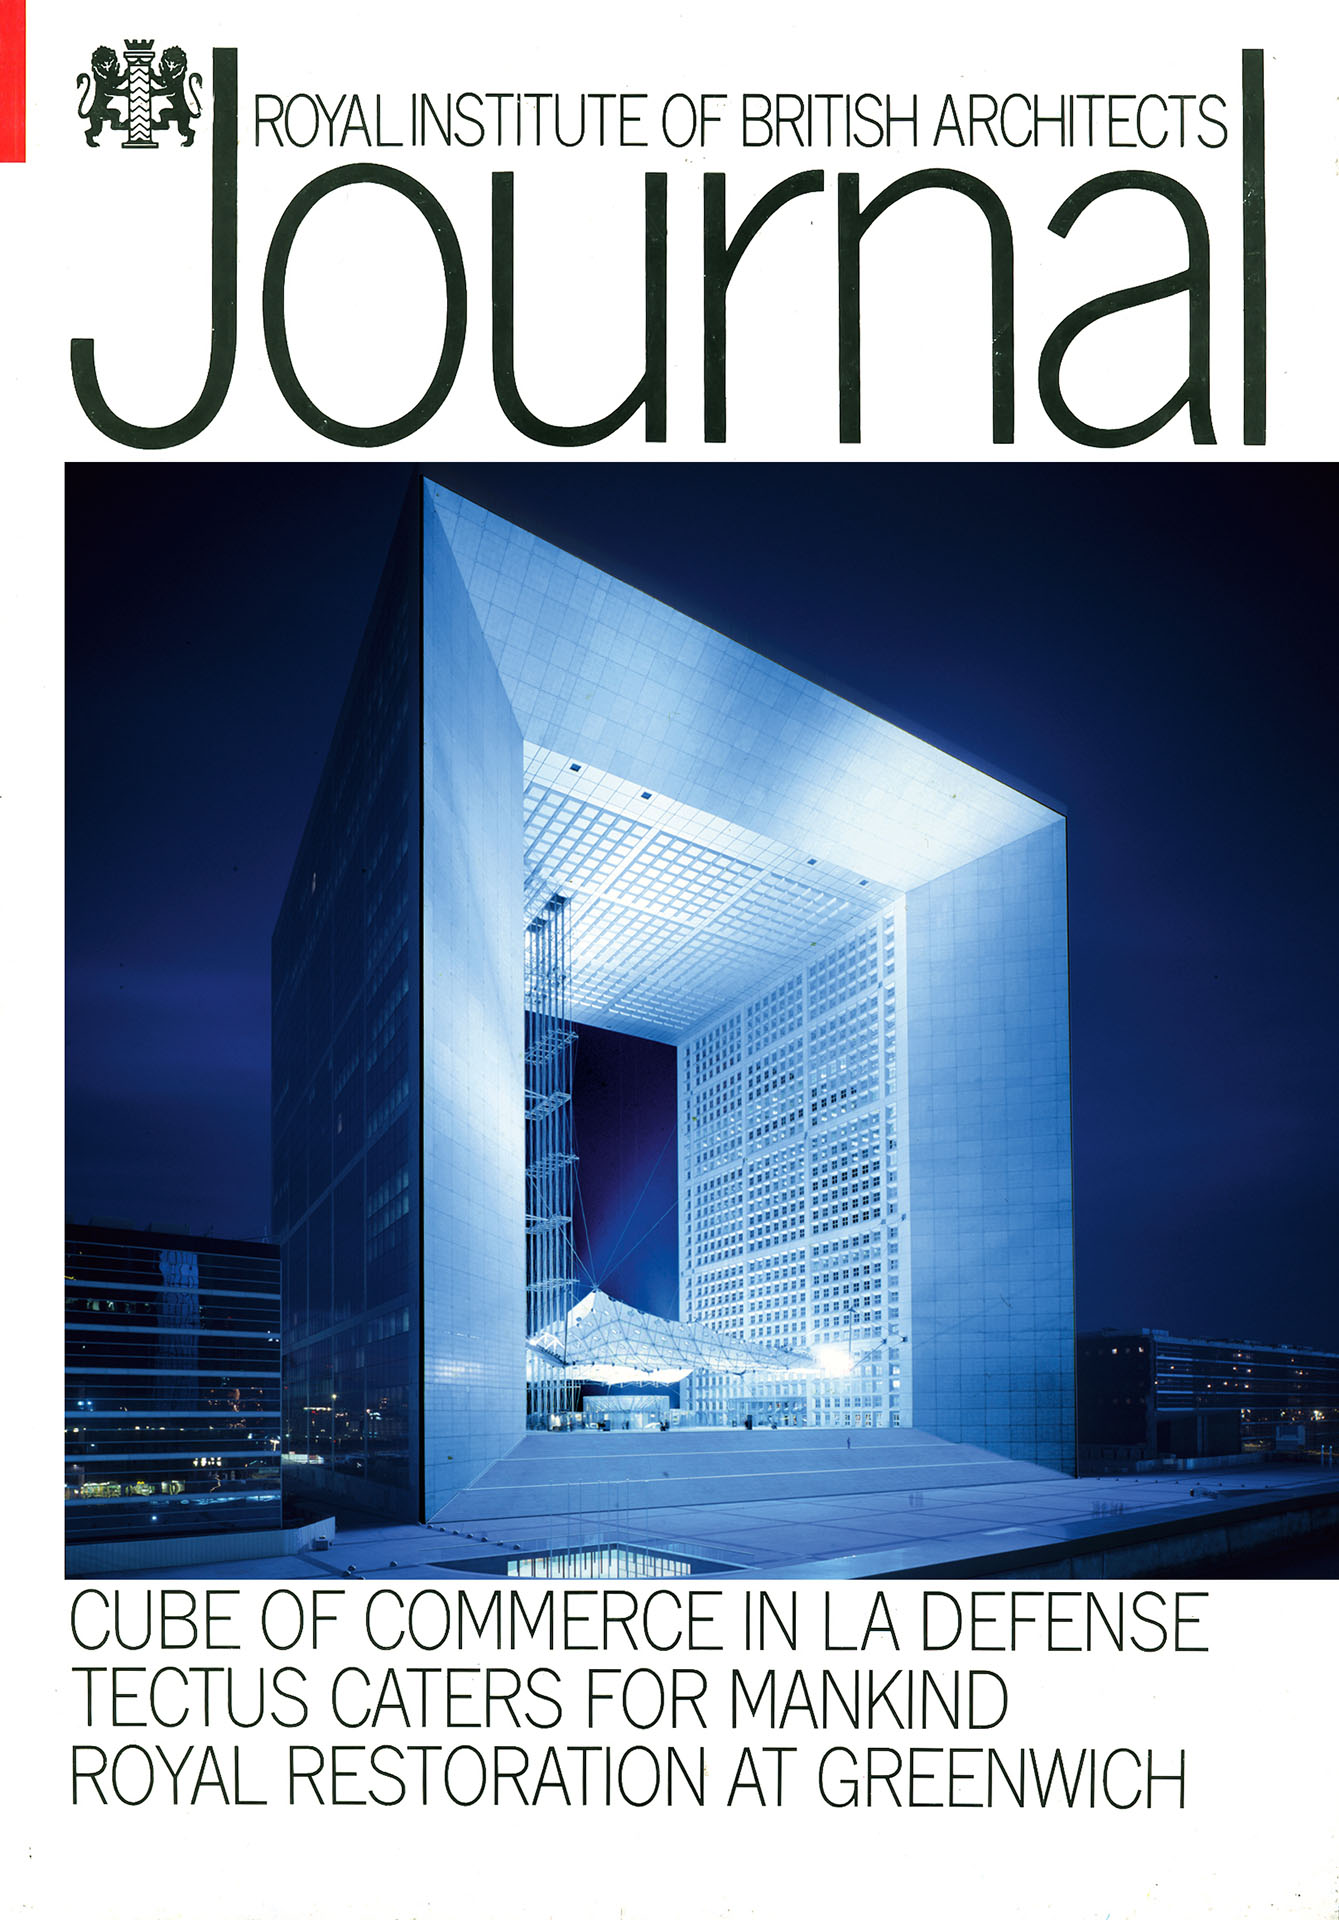 RIBA Journal cover story on Grande Arche - Cube of Commerce Paris